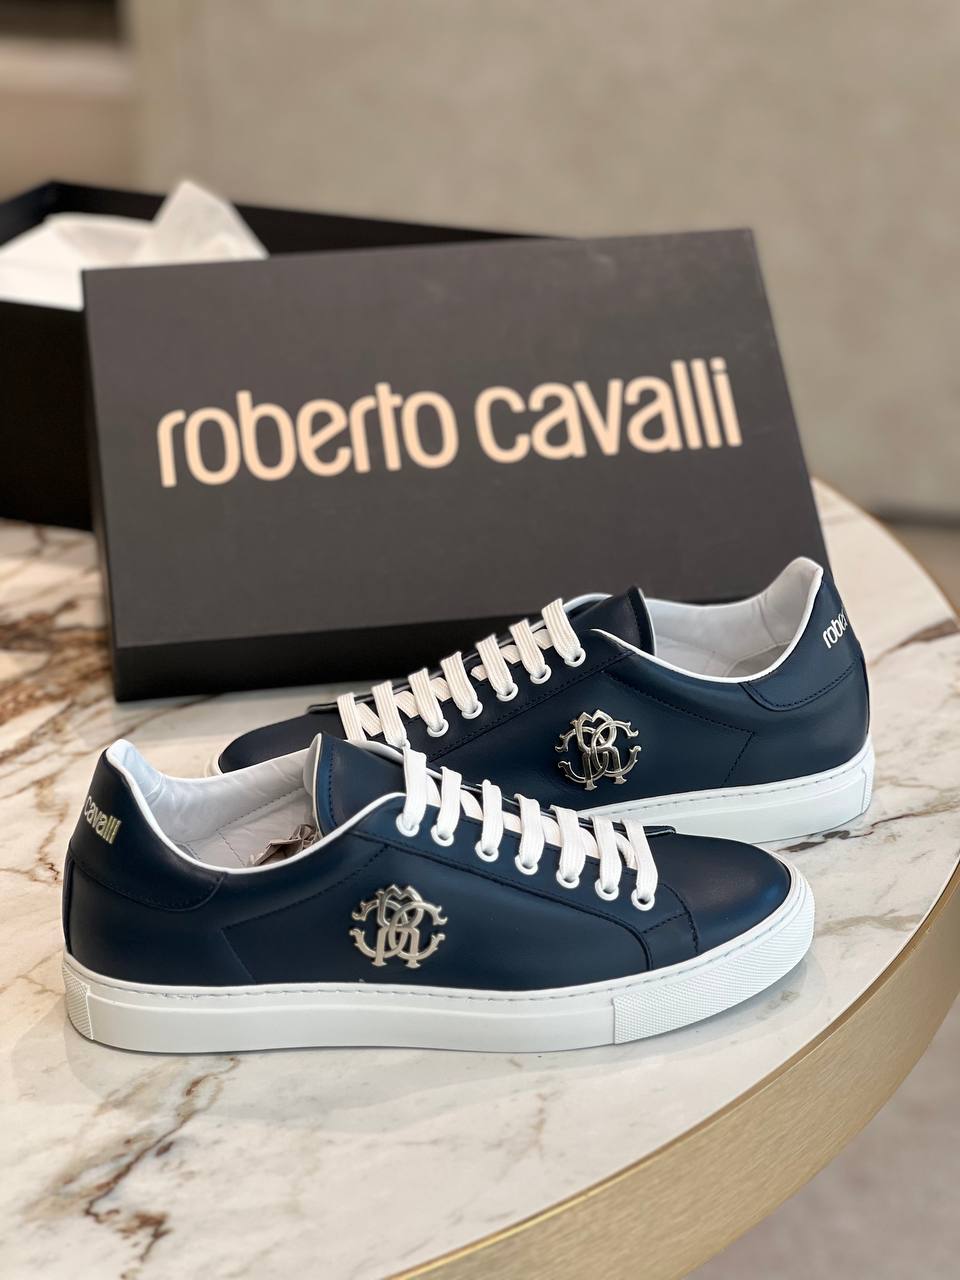 Roberto Cavalli Outlets 5767